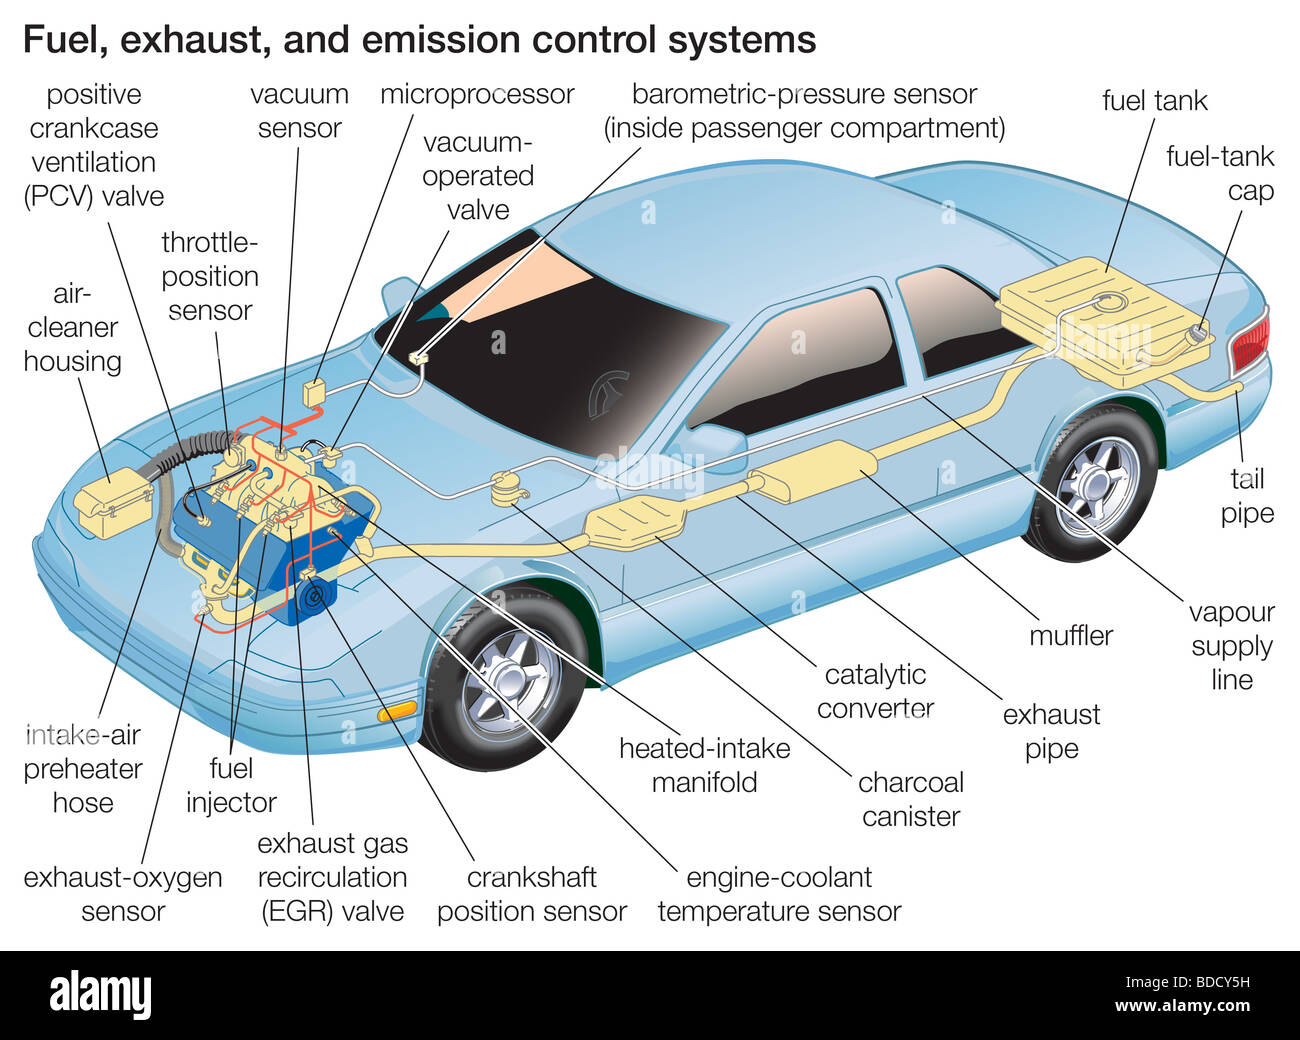 Fuel, exhaust and emission control systems Stock Photo